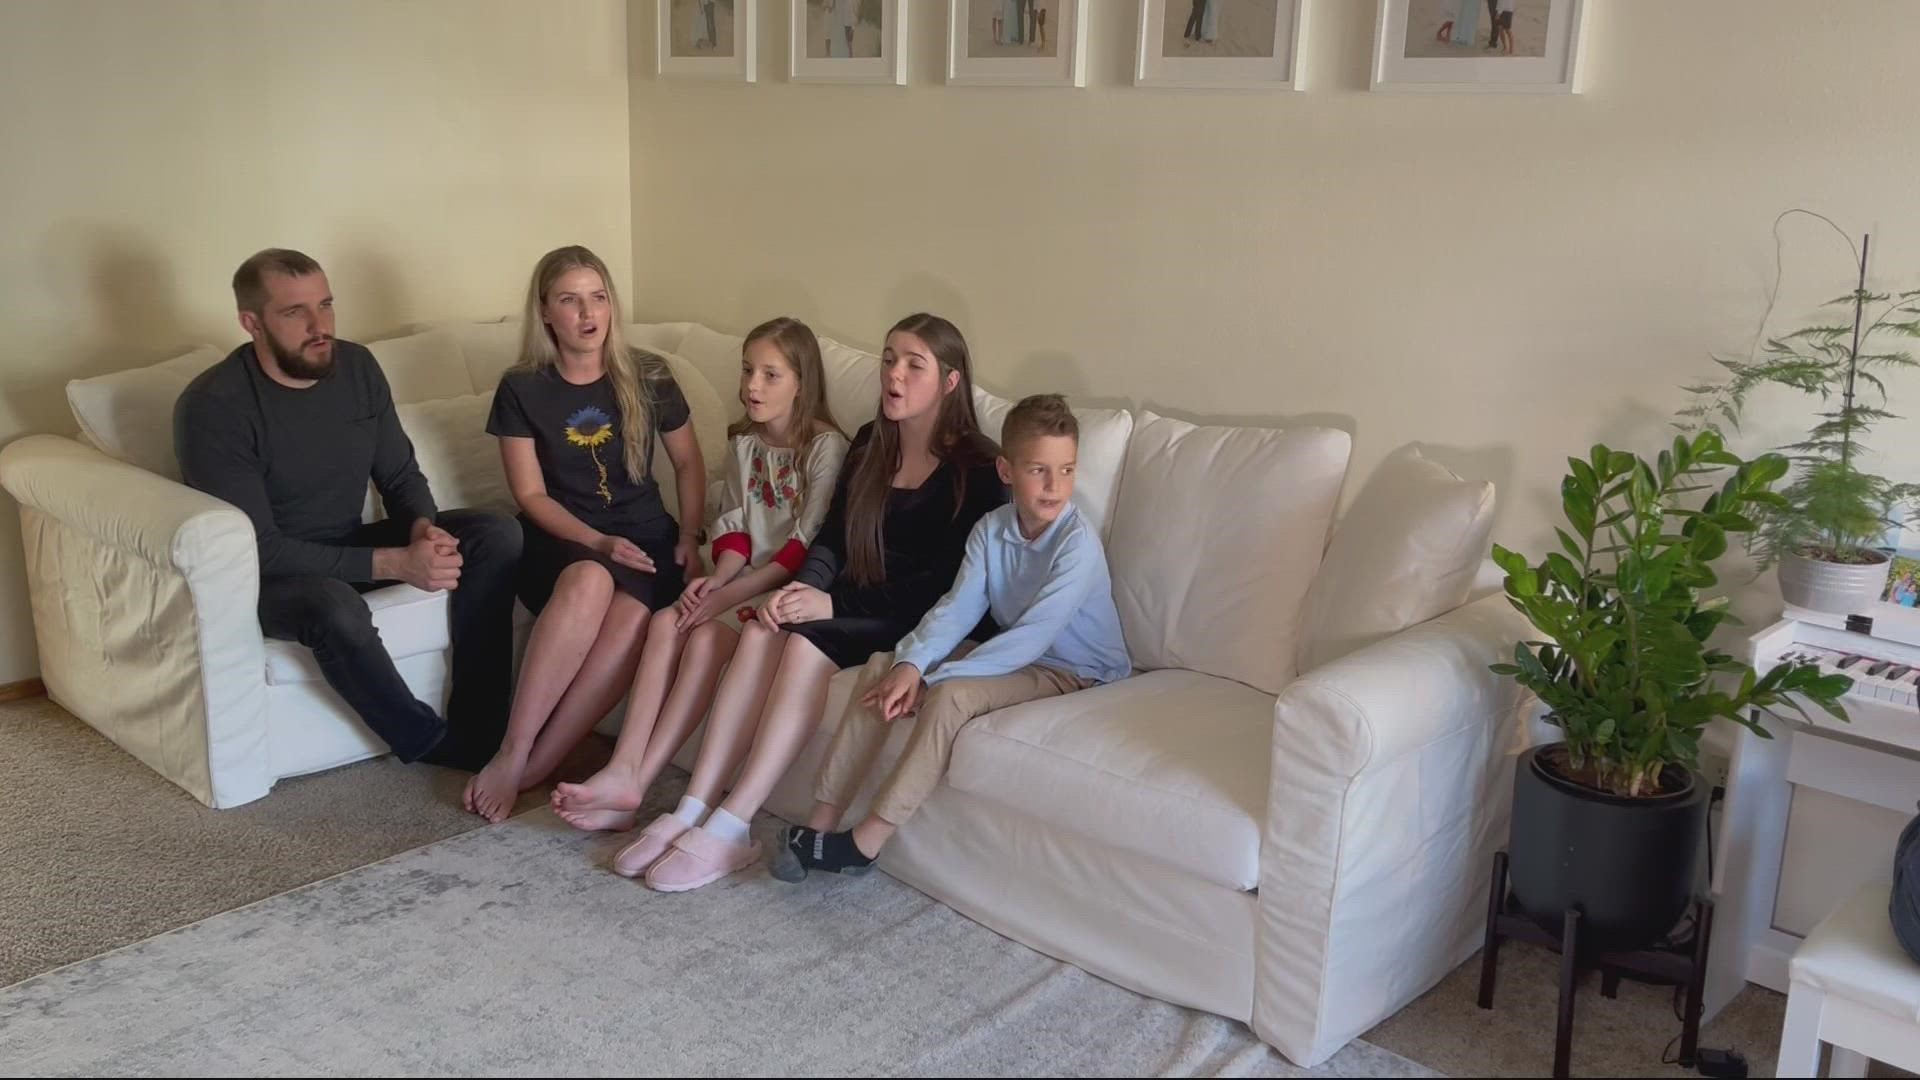 A family in Happy Valley is giving a Ukrainian couple a place to stay after they fled the war in Ukraine. KGW's Galen Ettlin has the story.